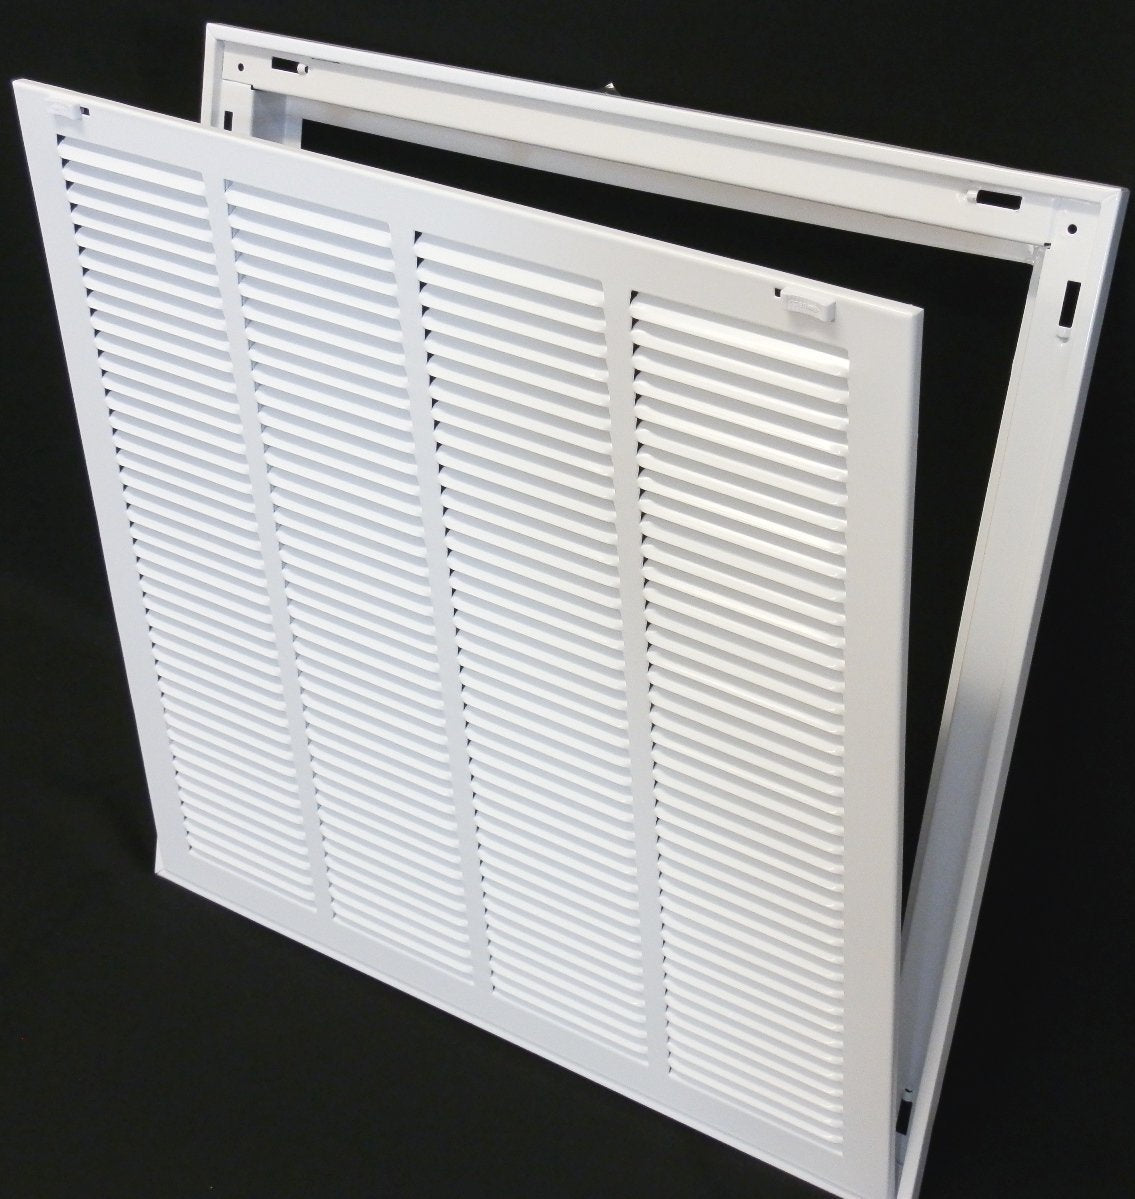 25&quot; X 30&quot; Steel Return Air Filter Grille for 1&quot; Filter - Removable Frame - [Outer Dimensions: 27 5/8&quot; X 32 5/8&quot;]